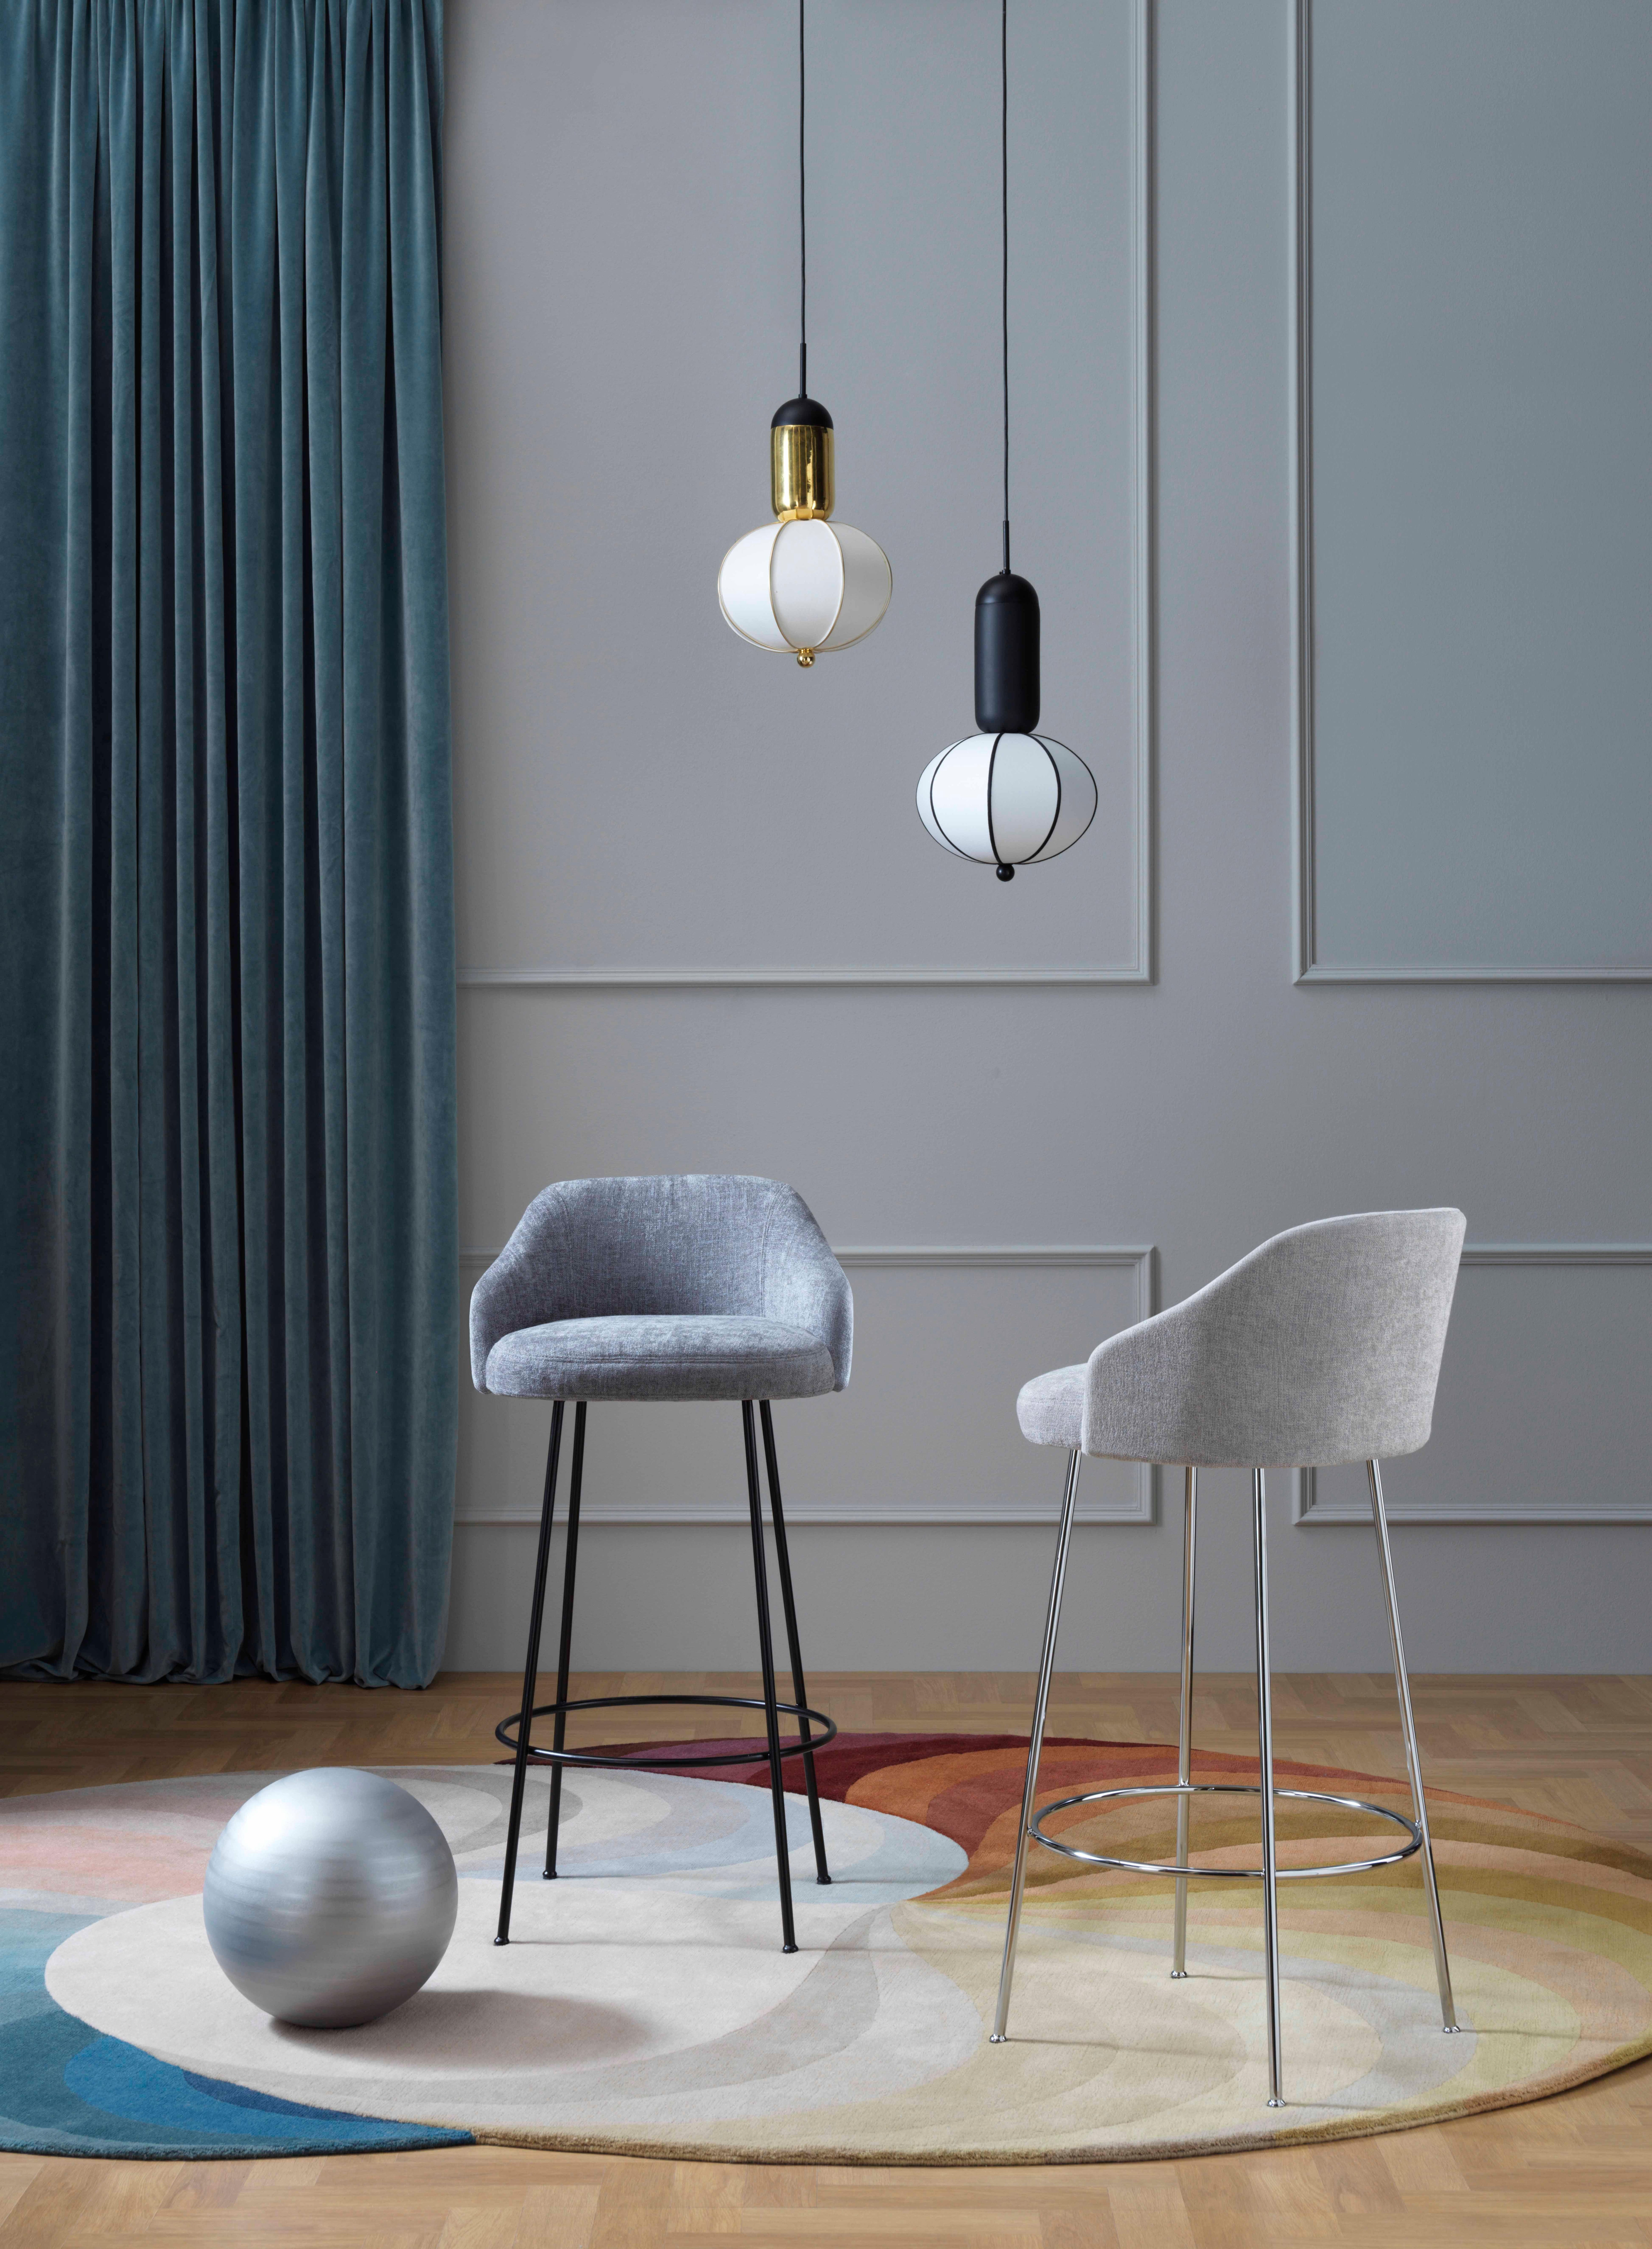 The whimsical and feminine touch that defines the Isabelle chairs has been elevated in the form of a stool element. The stool maintains the organic shape that characterizes the seating solution, accentuated by the lavish upholstery: velvet and